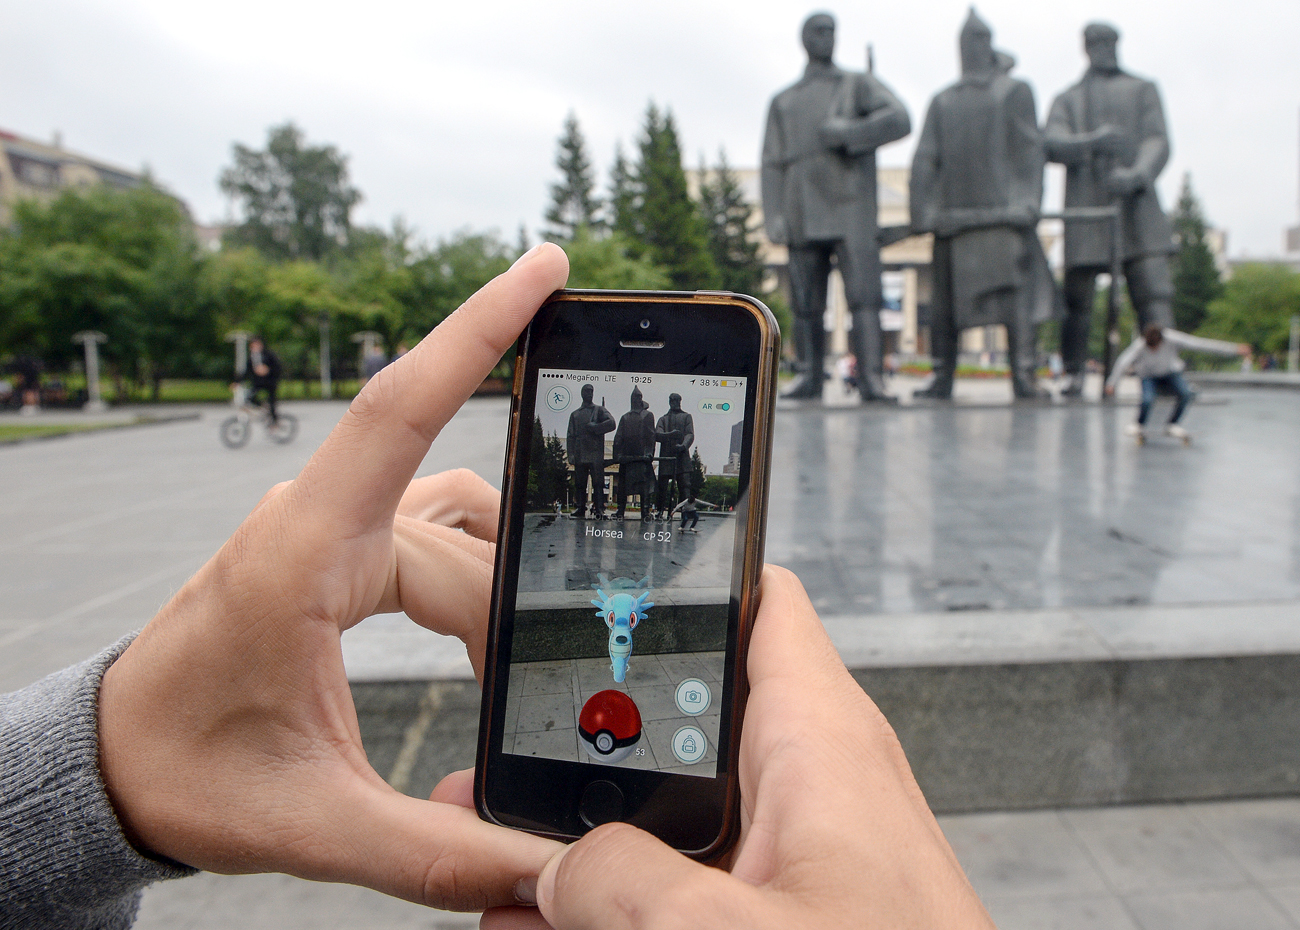 Pokemon Go, the mobile game from Nintendo, on their mobile phones in the park across the street from the Novosibirsk Opera